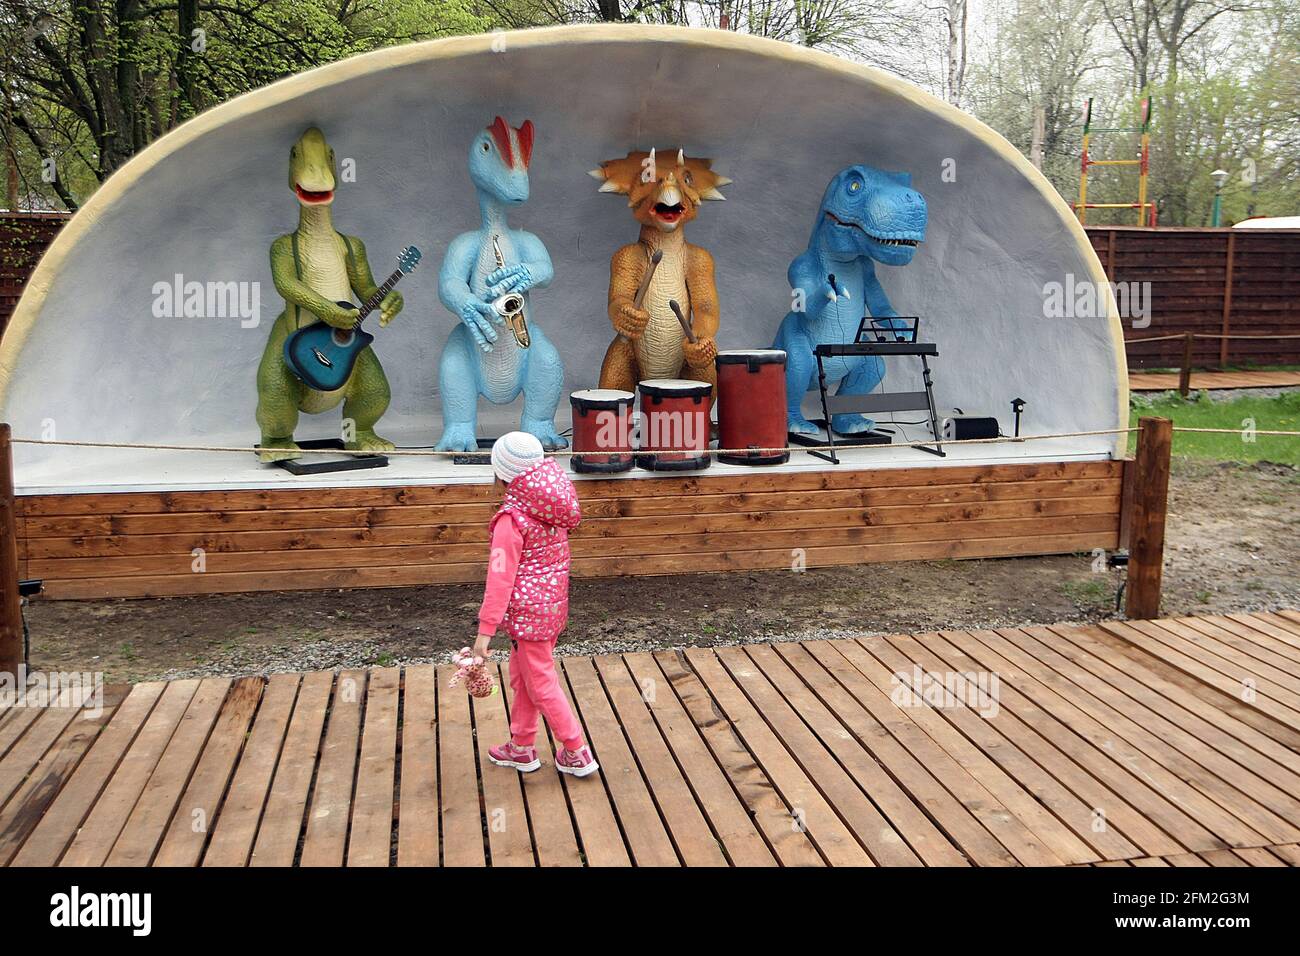 KYIV, UKRAINE - MAY 02, 2021 - A girl passes by the Music Band installation of robotic dinosaur figures on the territory of the metropolitan Hydropark Stock Photo